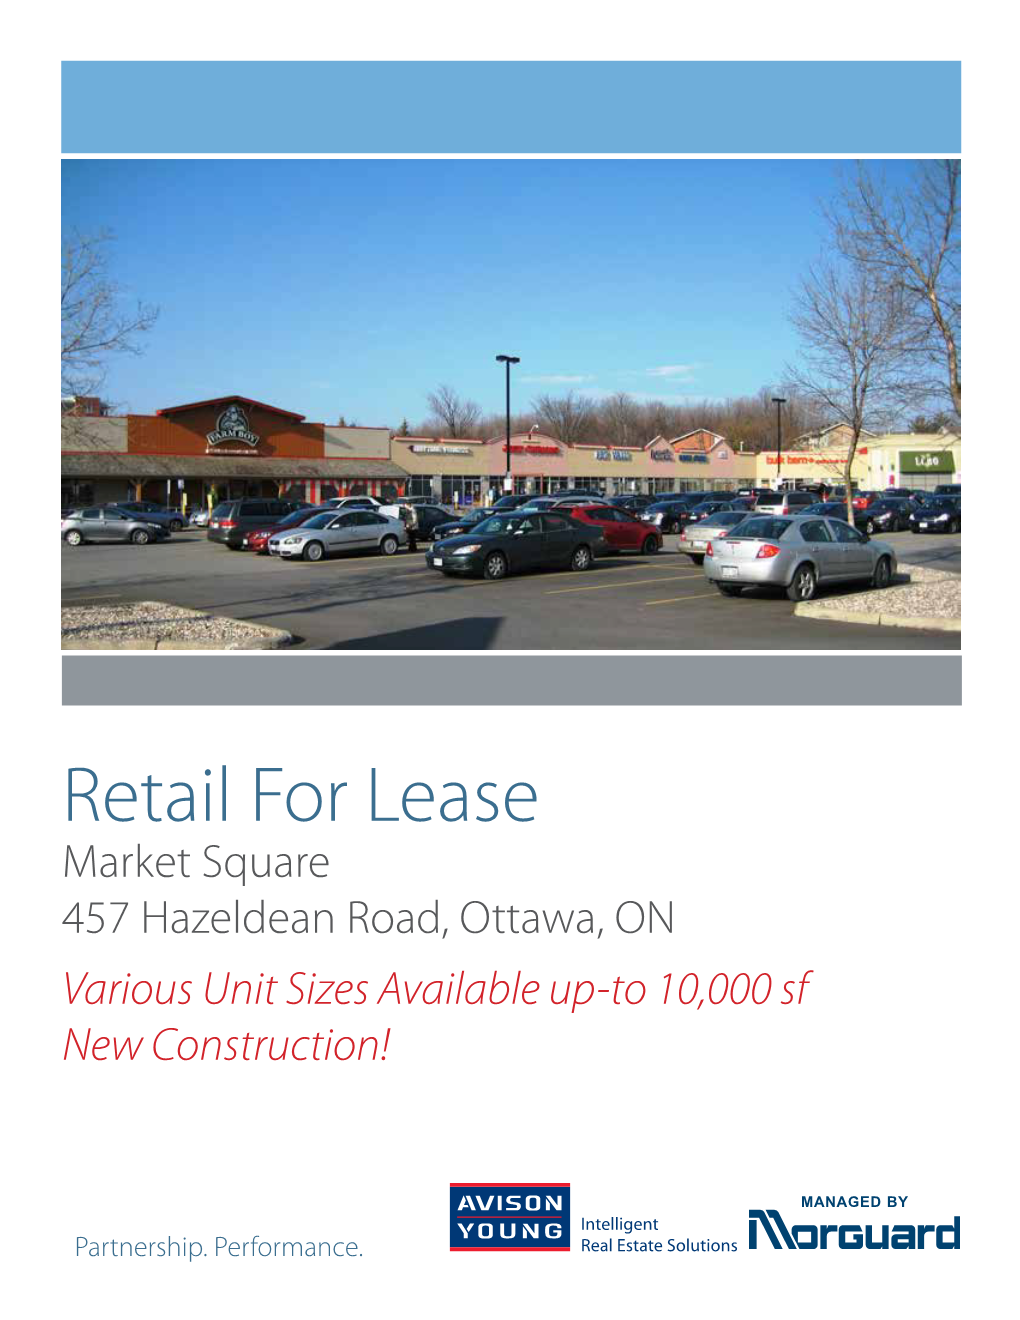 Retail for Lease Market Square 457 Hazeldean Road, Ottawa, on Various Unit Sizes Available Up-To 10,000 Sf New Construction!